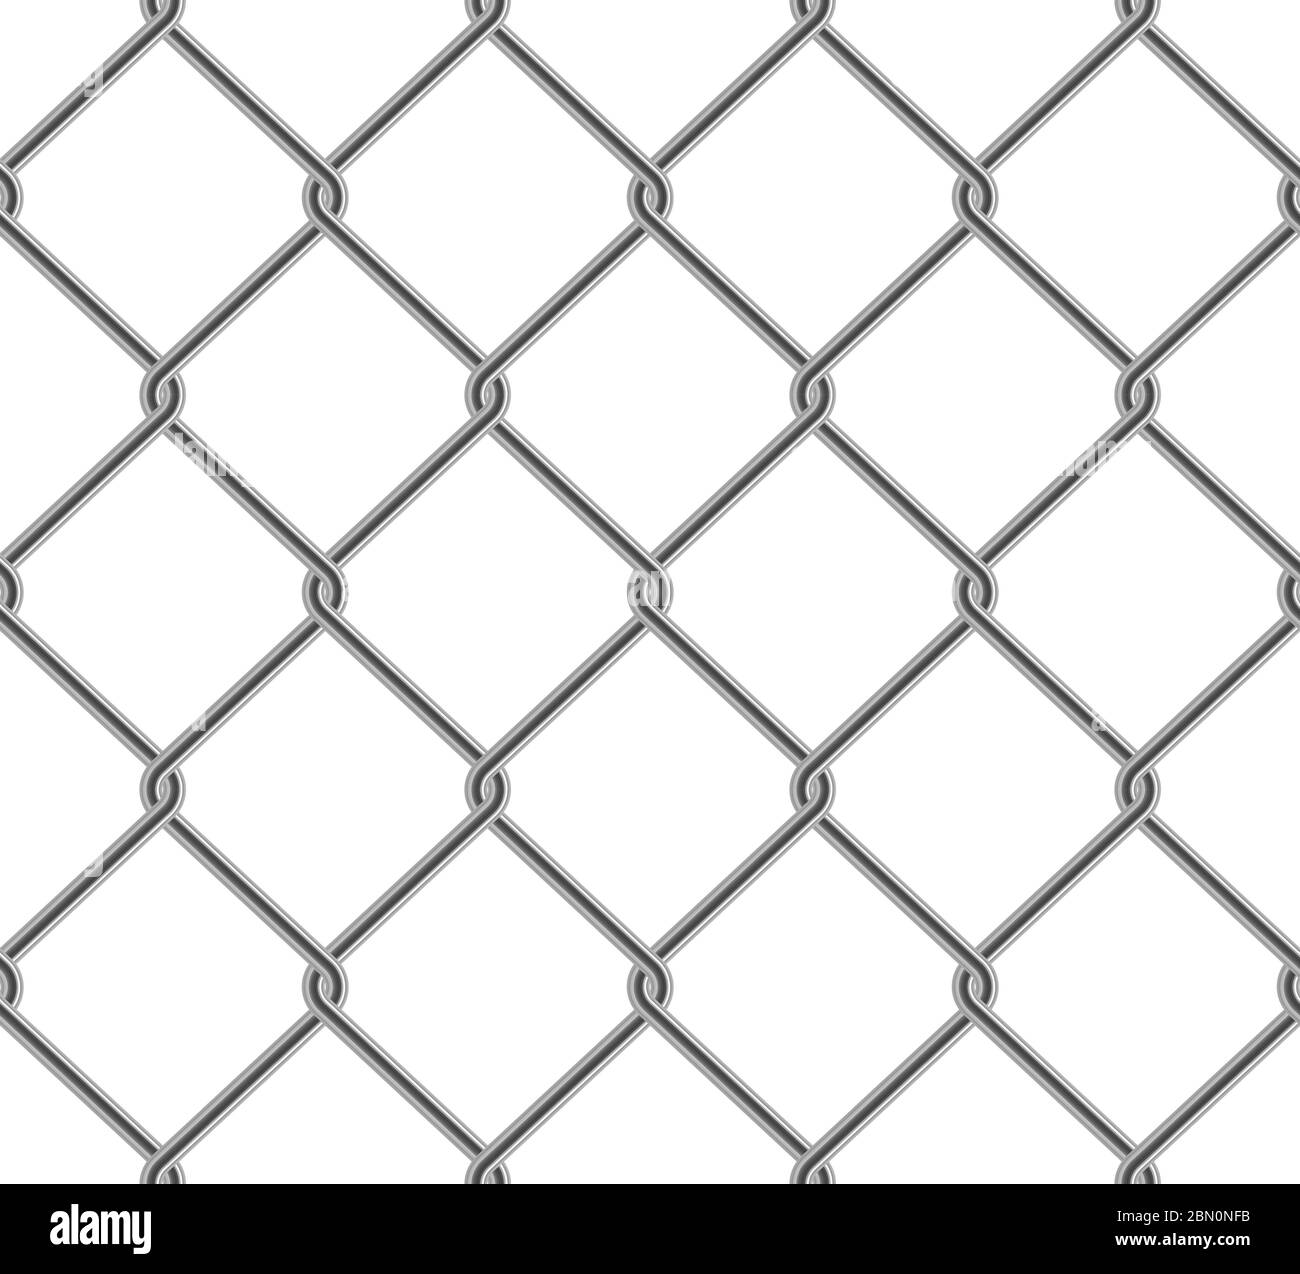 Seamless wired chain link fence pattern realistic style Stock Vector